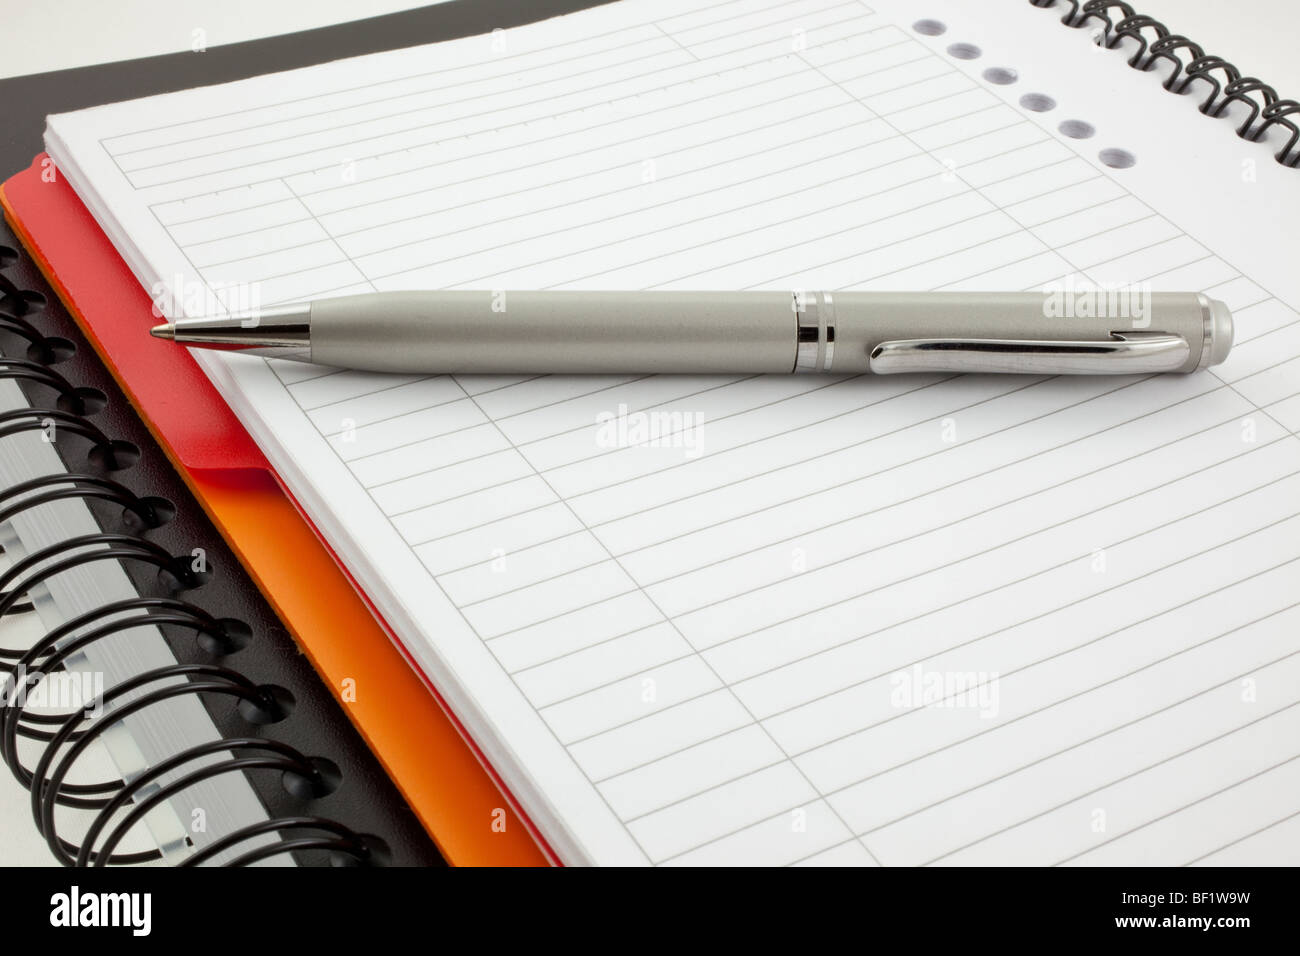 silver pen and two paper notebooks: orange and black Stock Photo